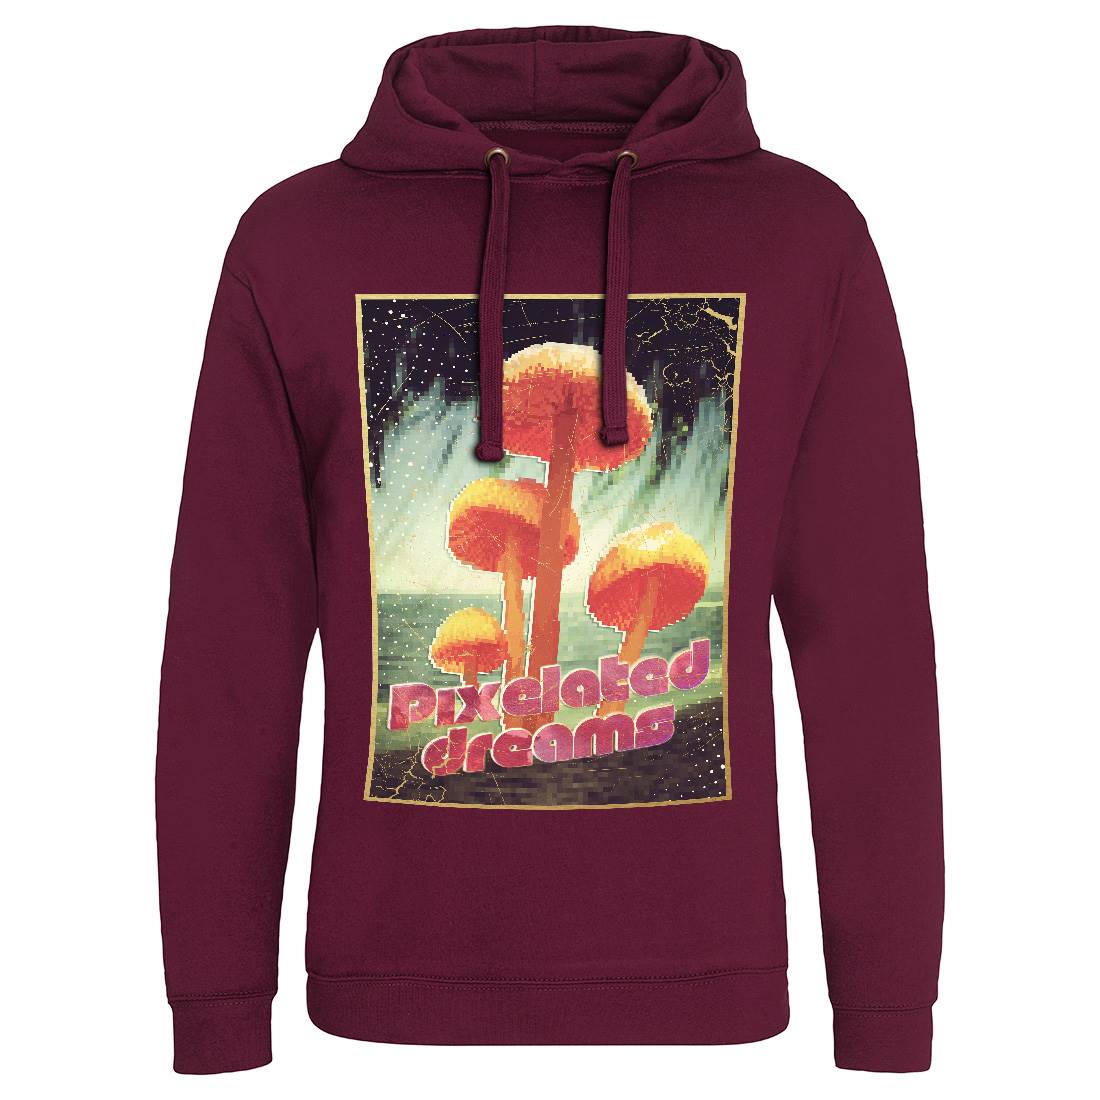 Pixelated Dreams Mens Hoodie Without Pocket Drugs A893